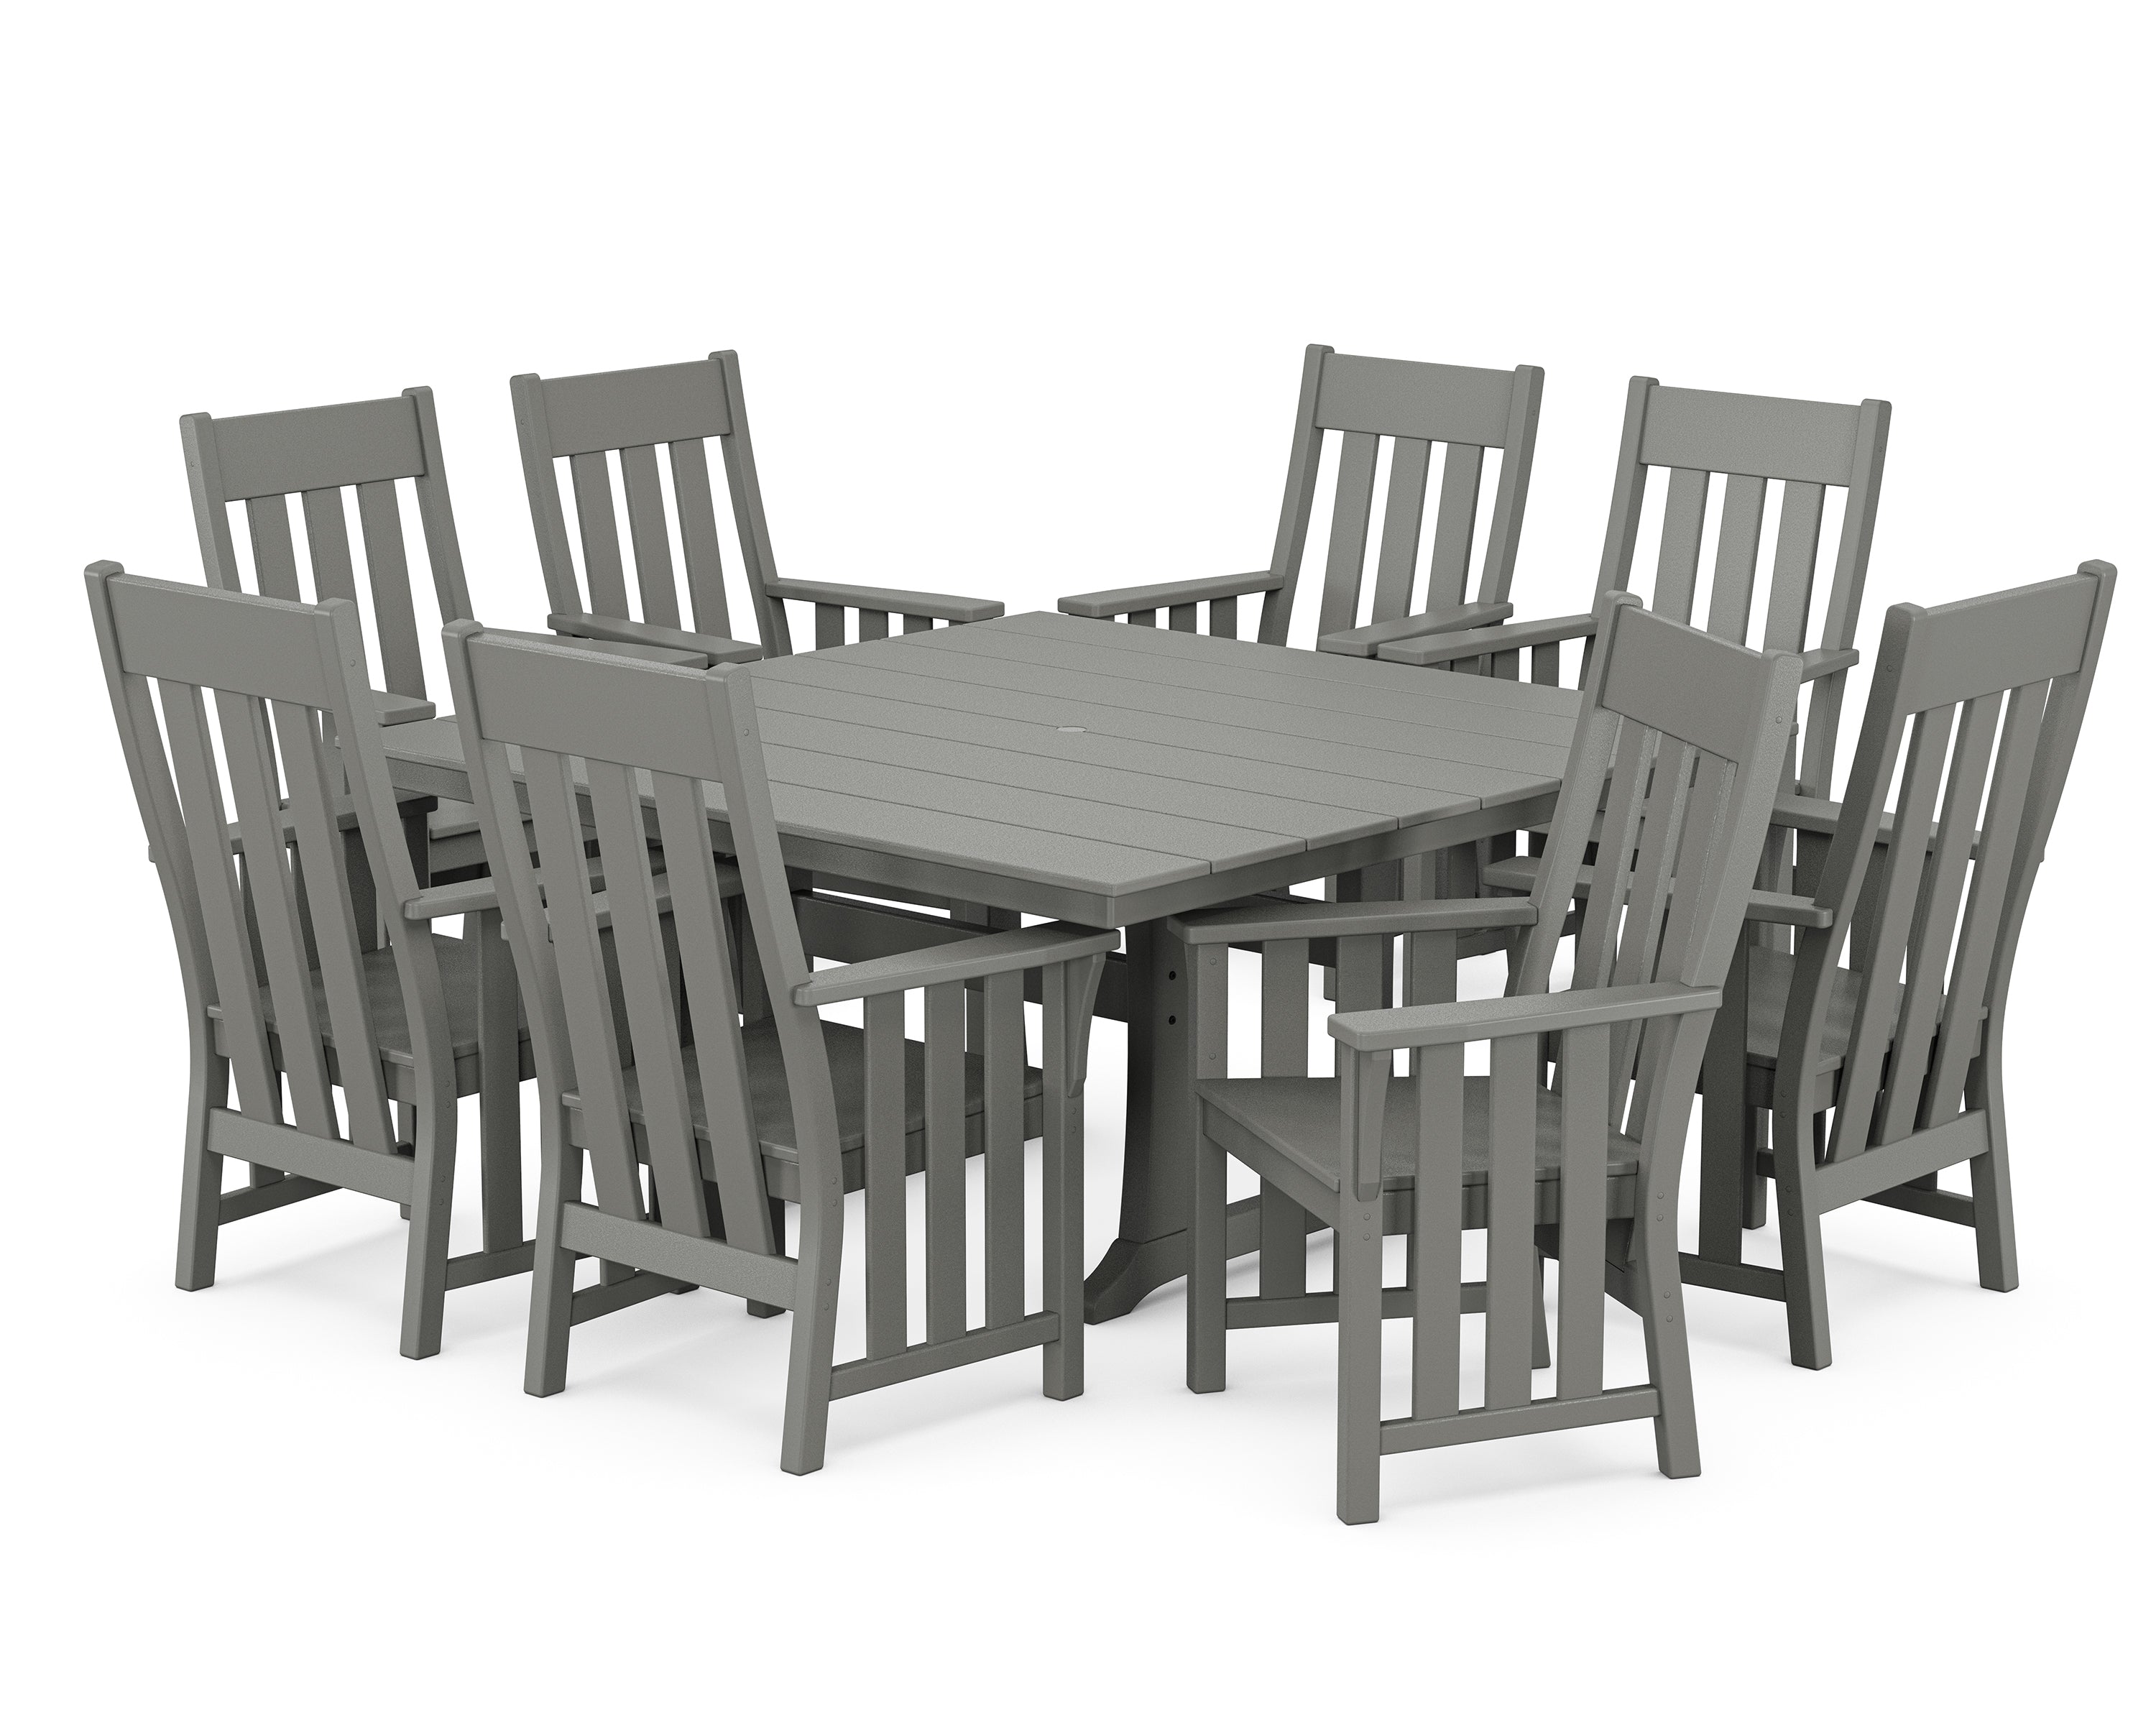 Martha Stewart by POLYWOOD® Acadia 9-Piece Square Farmhouse Dining Set with Trestle Legs in Slate Grey